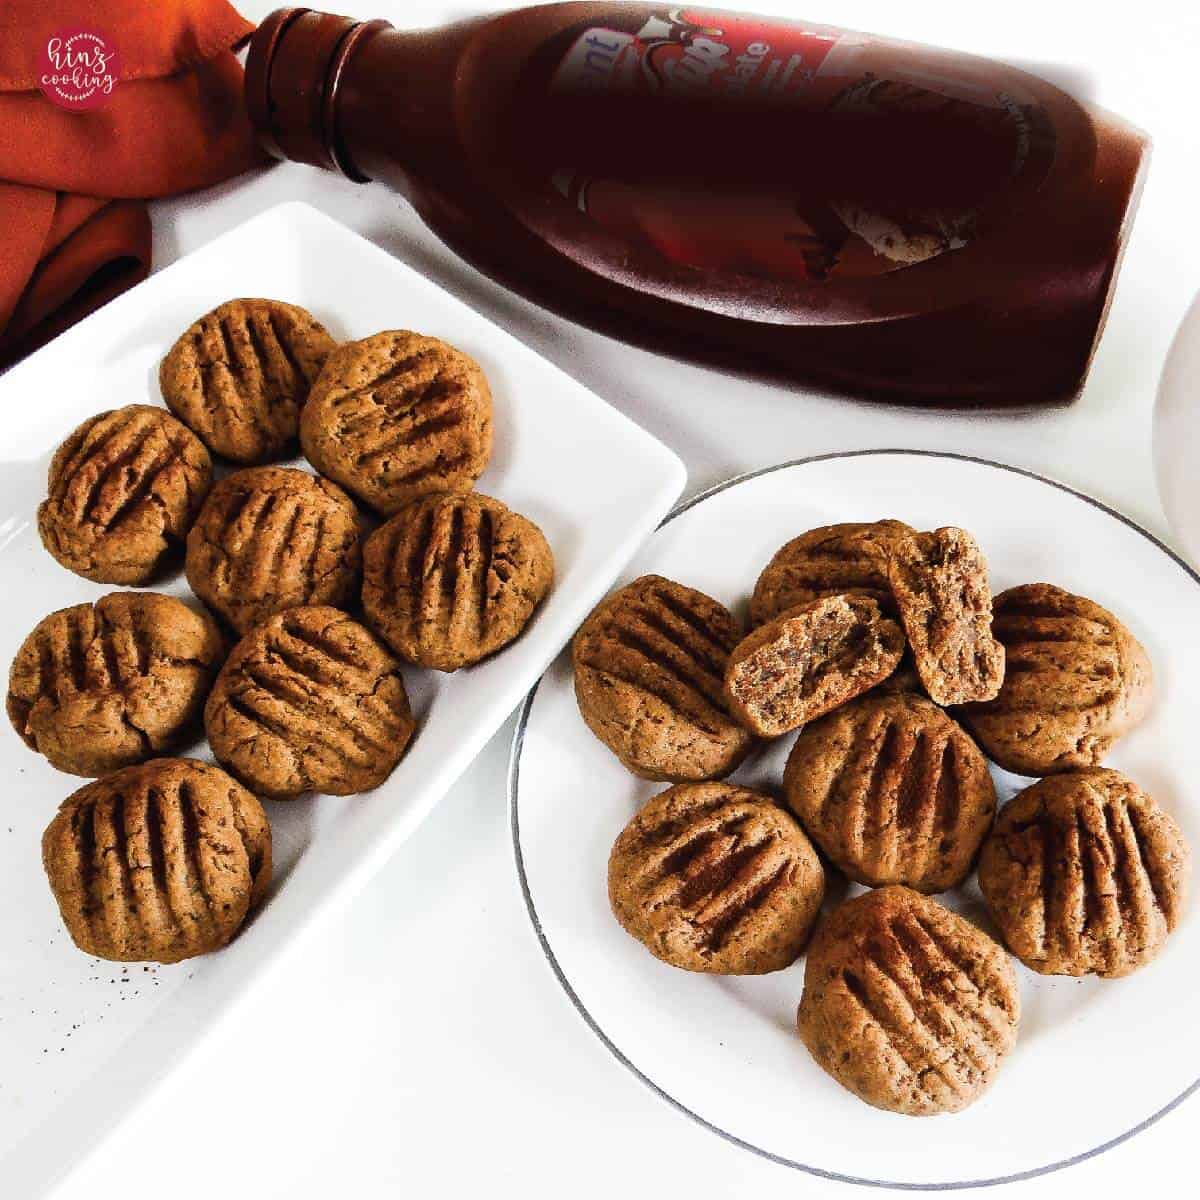 8 coffee cookies in a rectangular platter and 6 cookies on a round plate. White background.